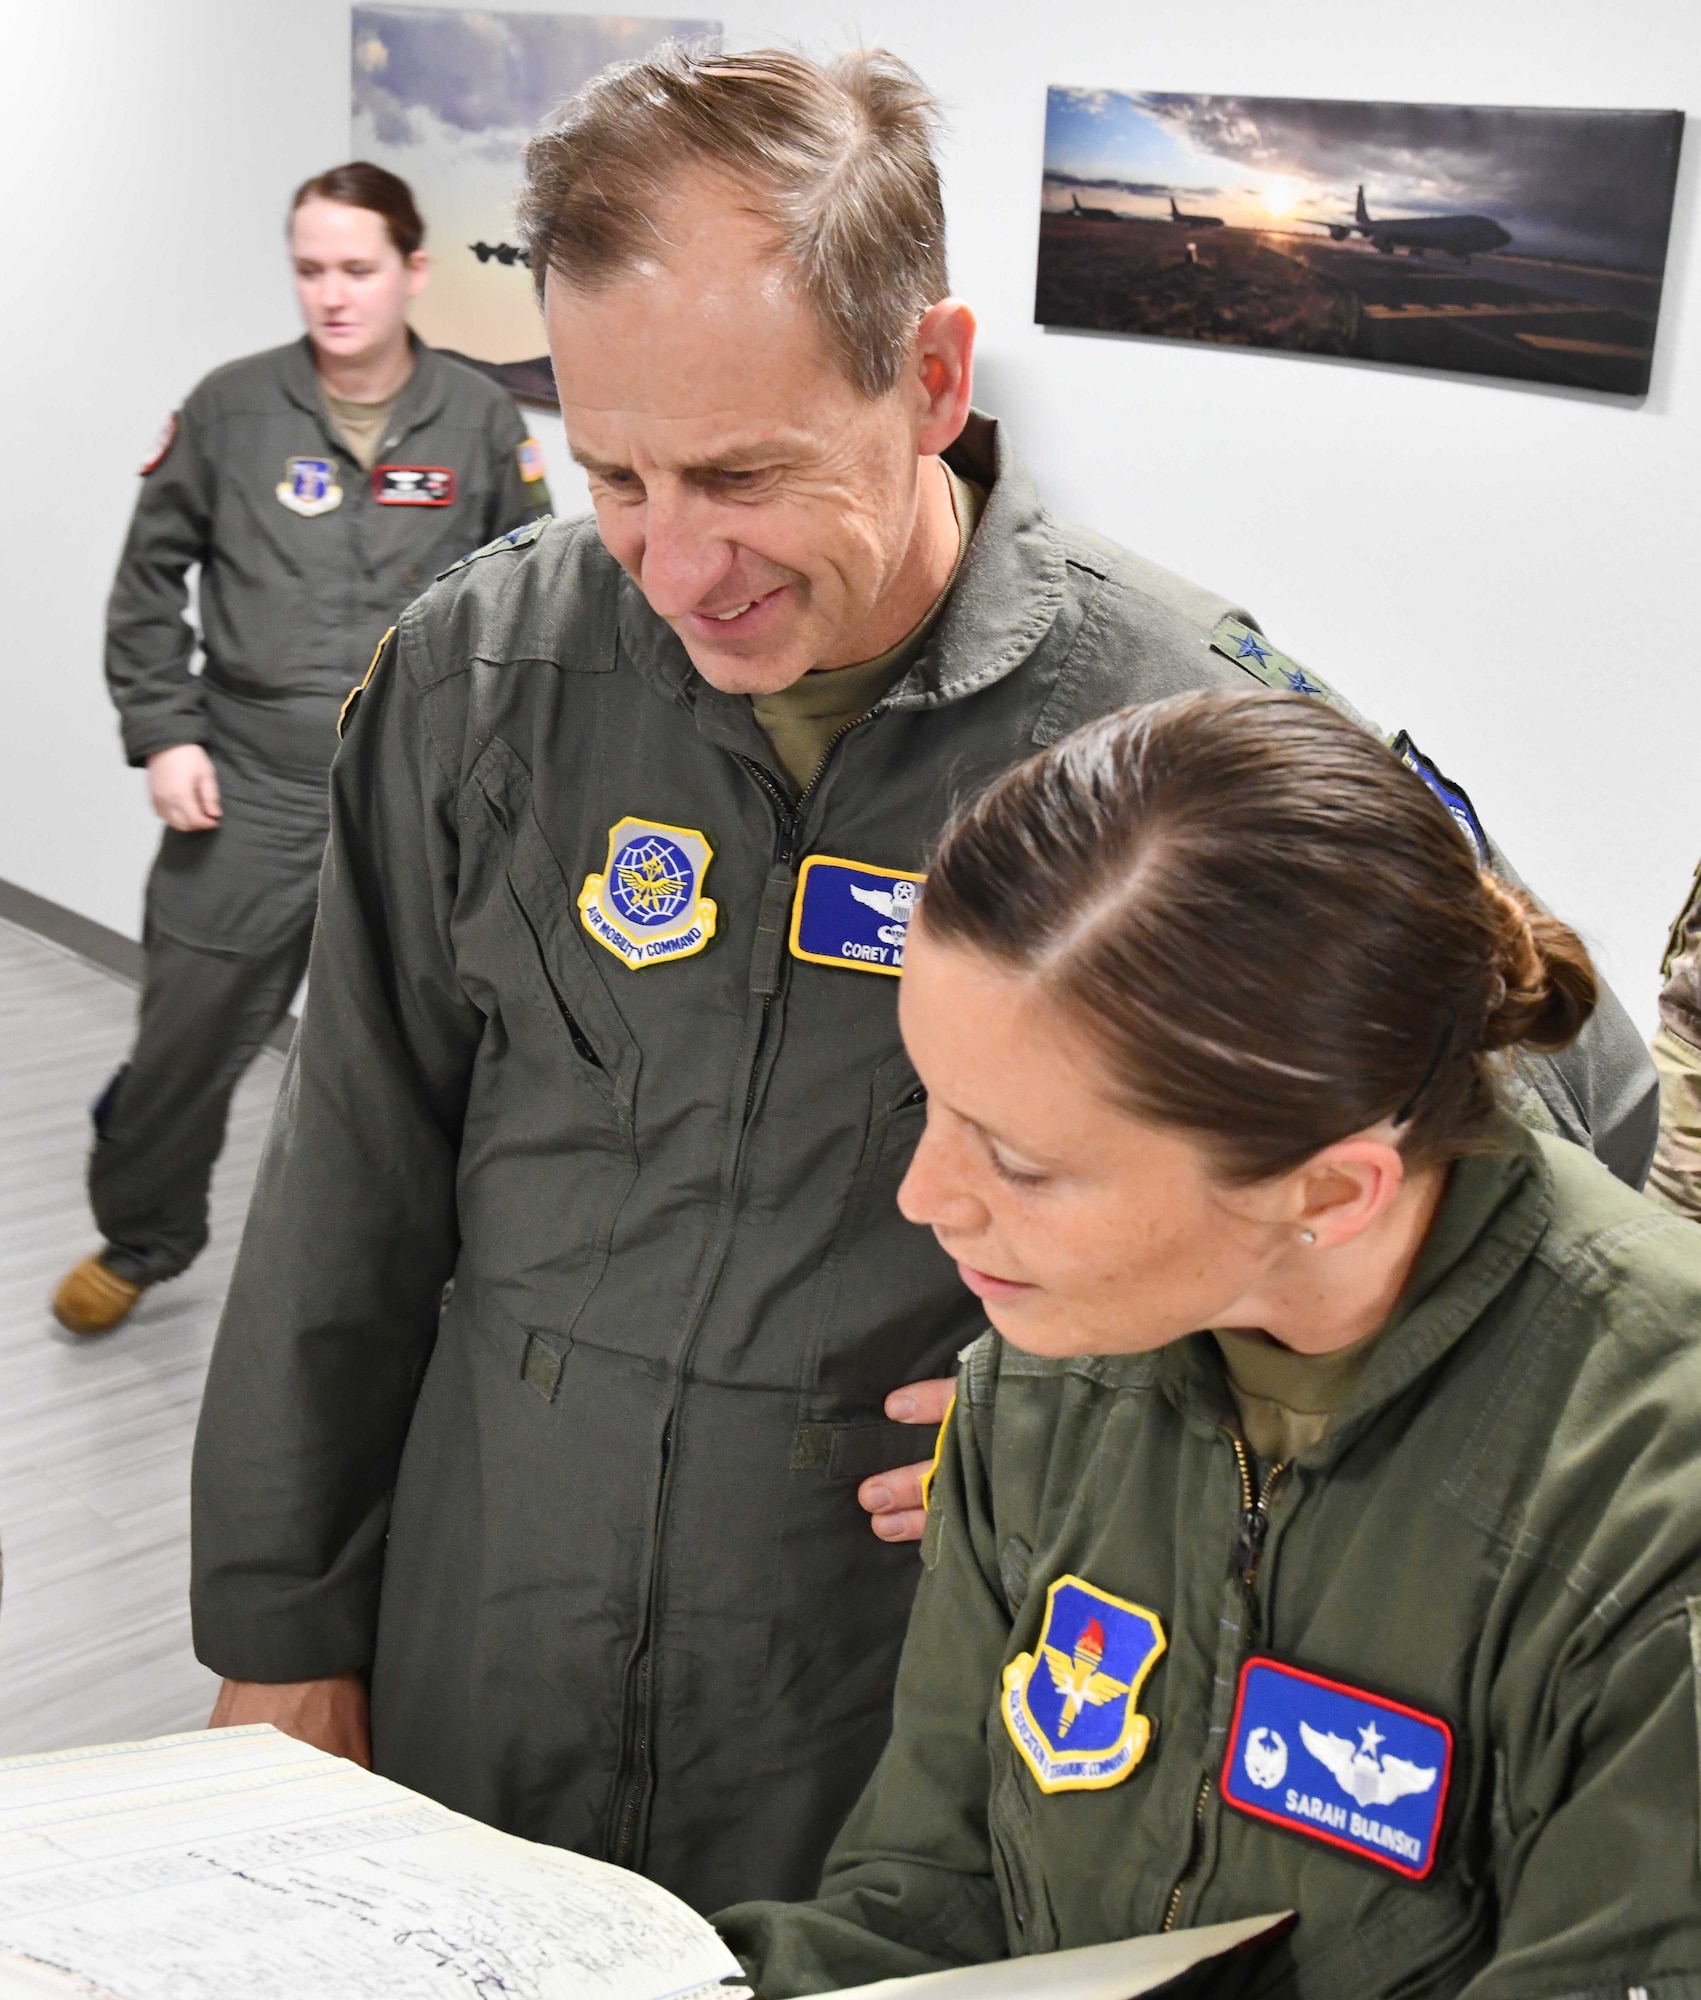 U.S. Air Force Lt. Col. Sarah Bulinski, 54th Air Refueling Squadron (ARS) commander, showcases a record of instructors to Maj. Gen. Corey J. Martin, 18th Air Force commander, at Altus Air Force Base (AAFB), Oklahoma, Jan. 26, 2023.  The log records every formal training unit instructor from the 54th ARS from 1987 to present day. (U.S. Air Force photo by Airman 1st Class Miyah Gray)